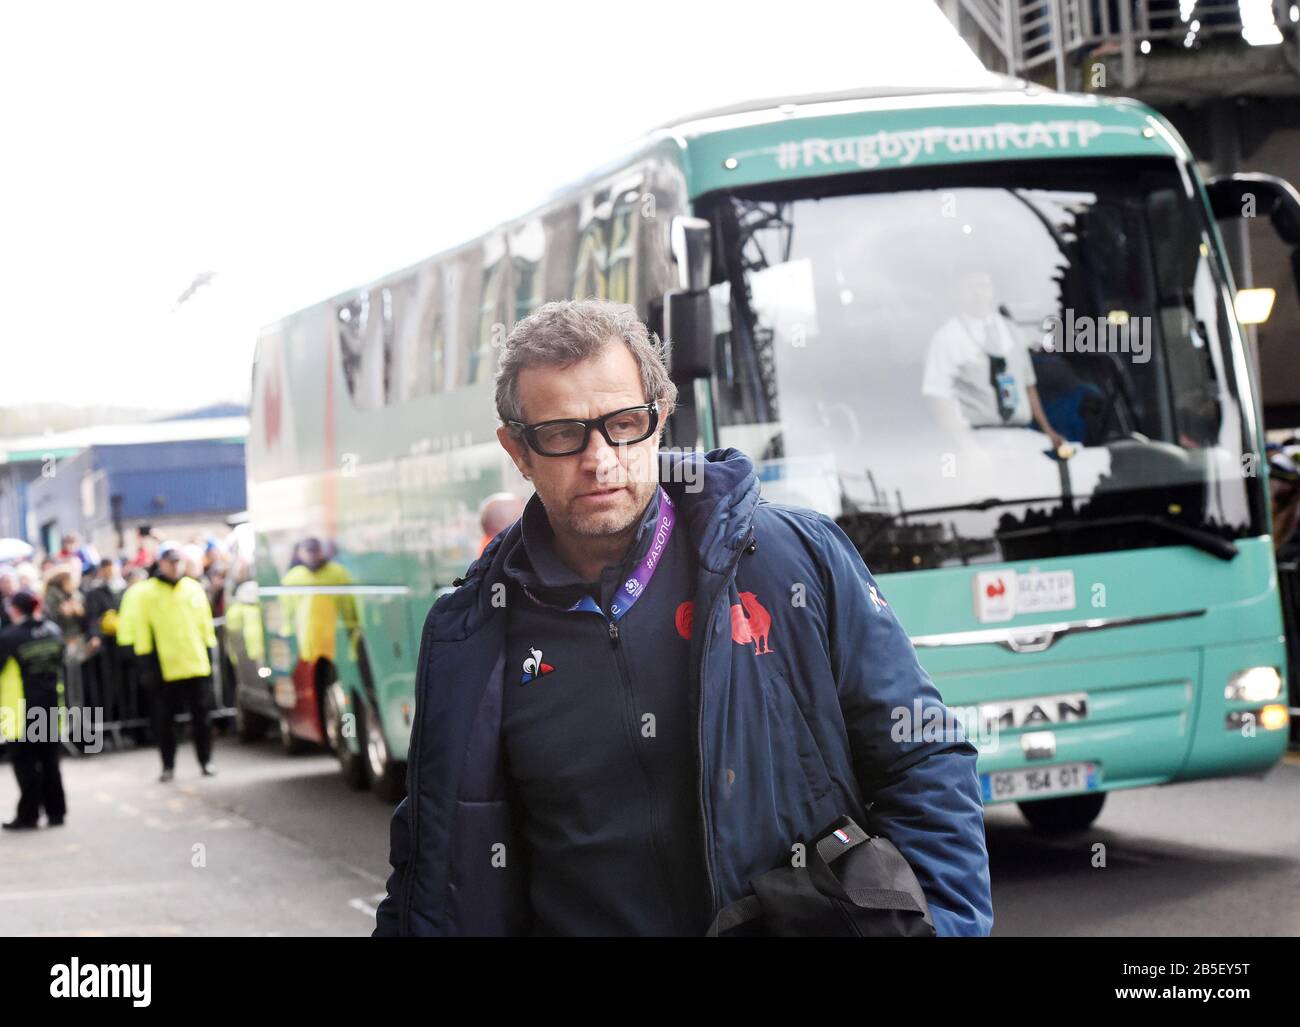 BT Murrayfield Stadium.Edinburgh.Scotland, UK. 8th Mar, 2020. Guinness Six Nations Test match Scotland v France. Fabien Galthi French Rugby Union Head Coach and former player, arrives at Murrayfield . Credit: eric mccowat/Alamy Live News Stock Photo